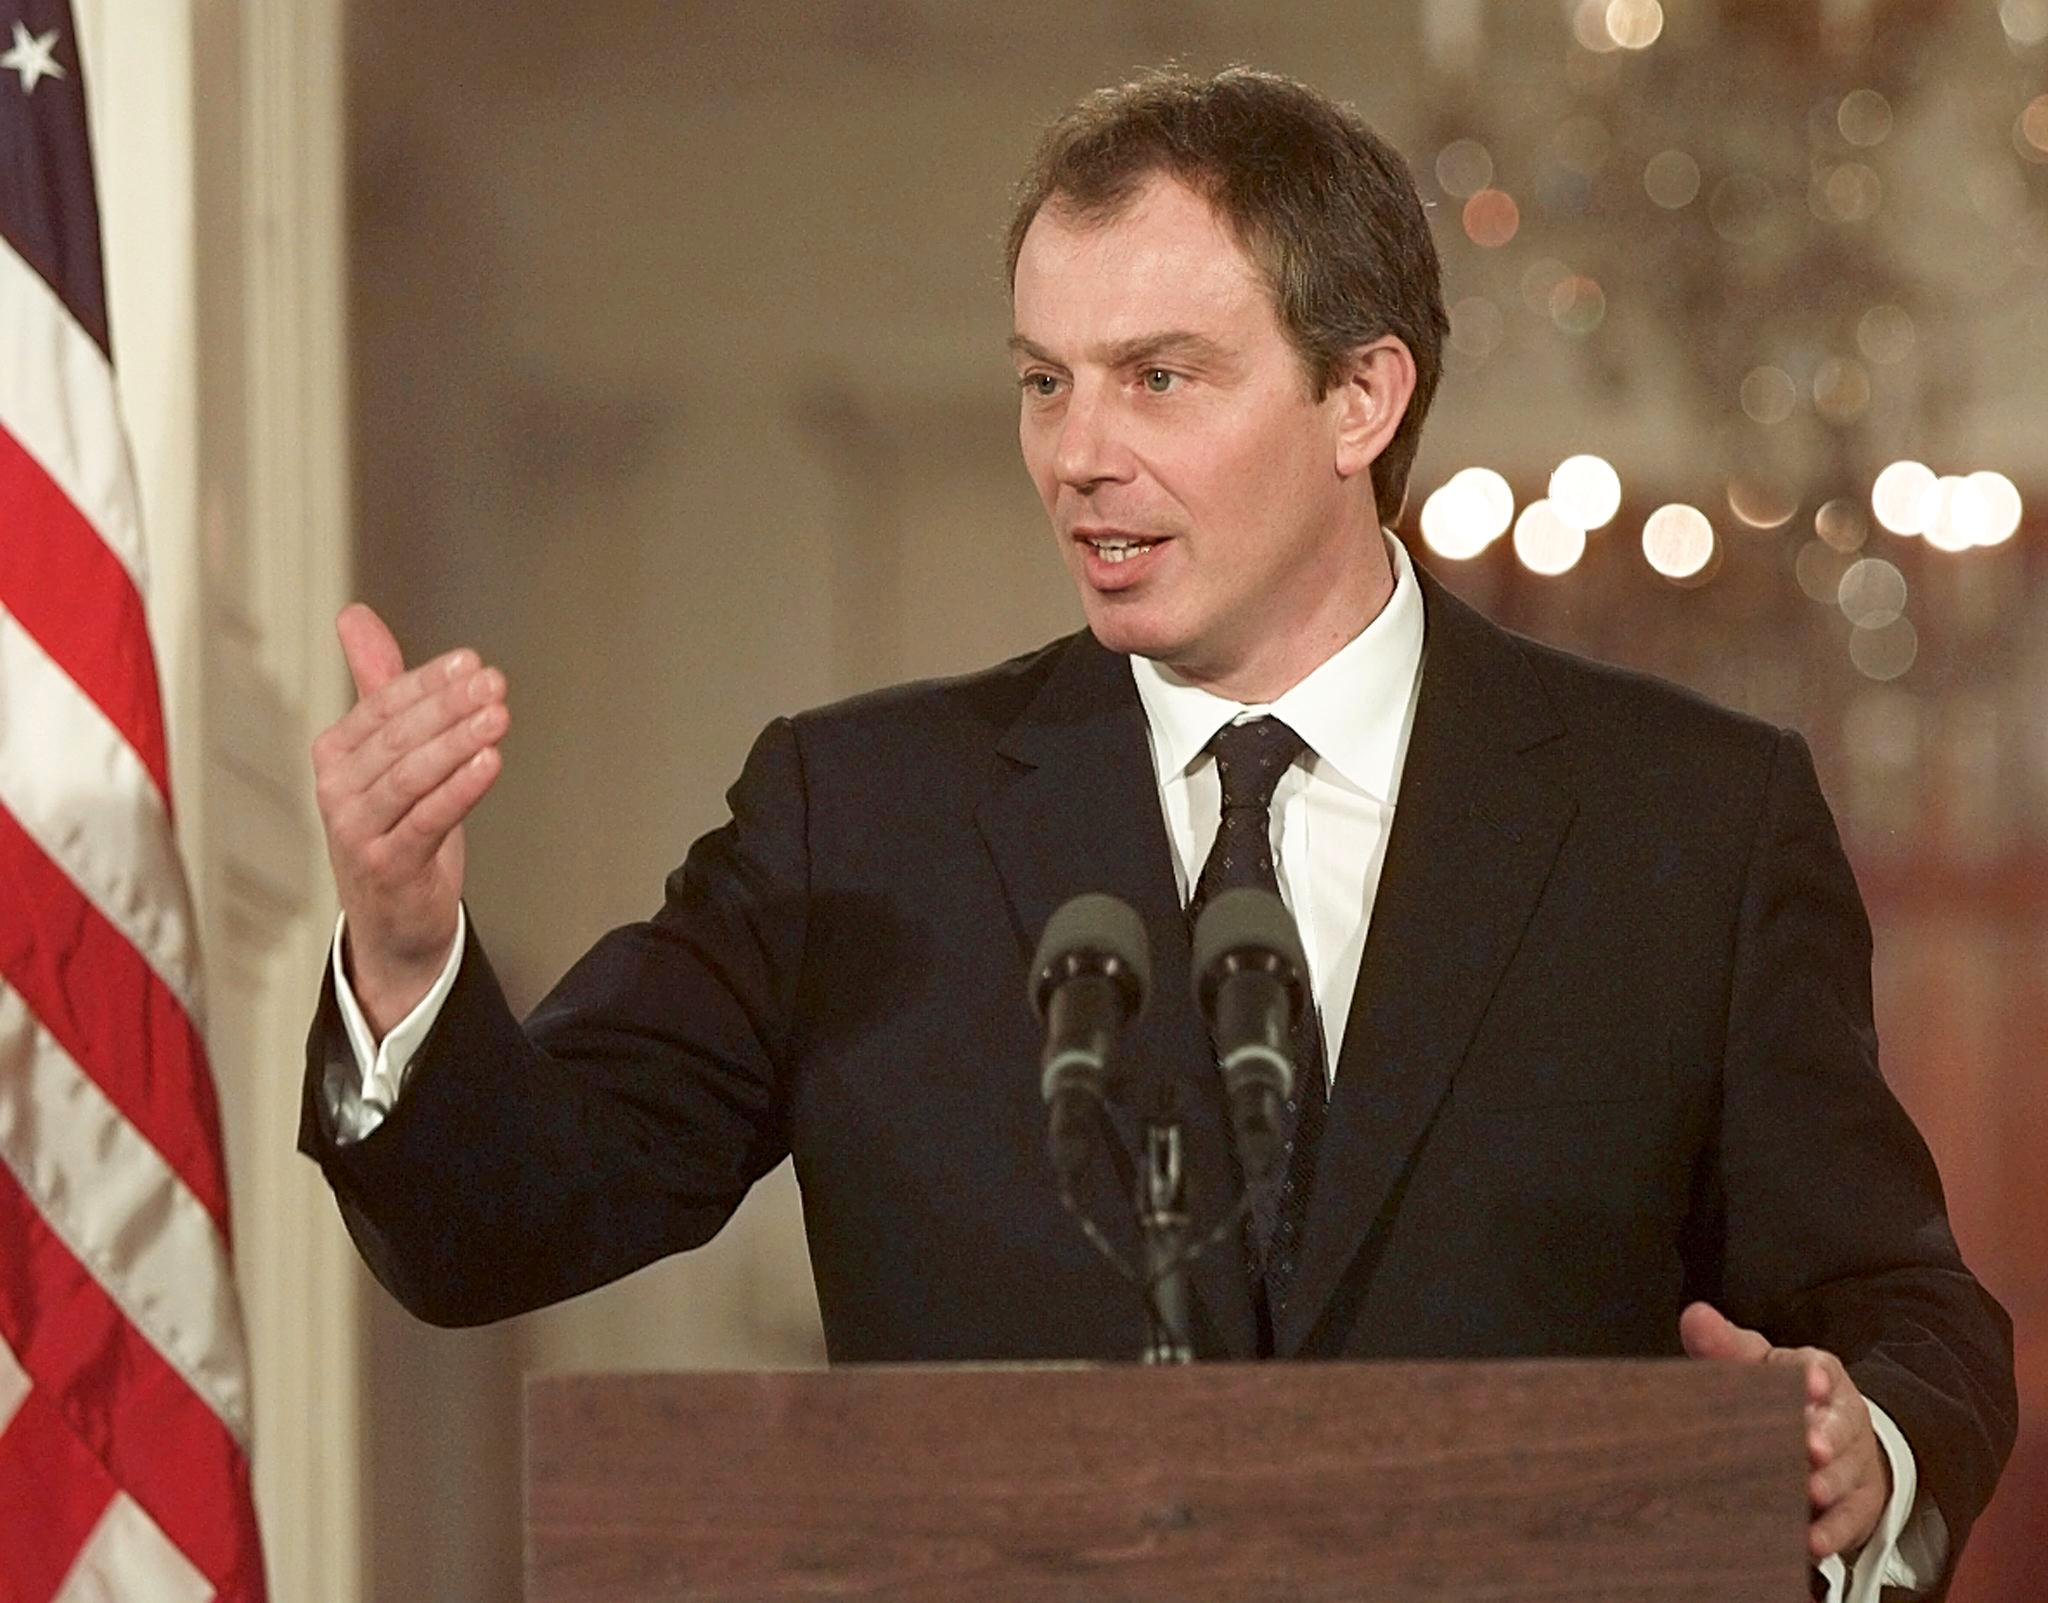 Blair was able to be authentic in an age of spin because he was confident in what he believed